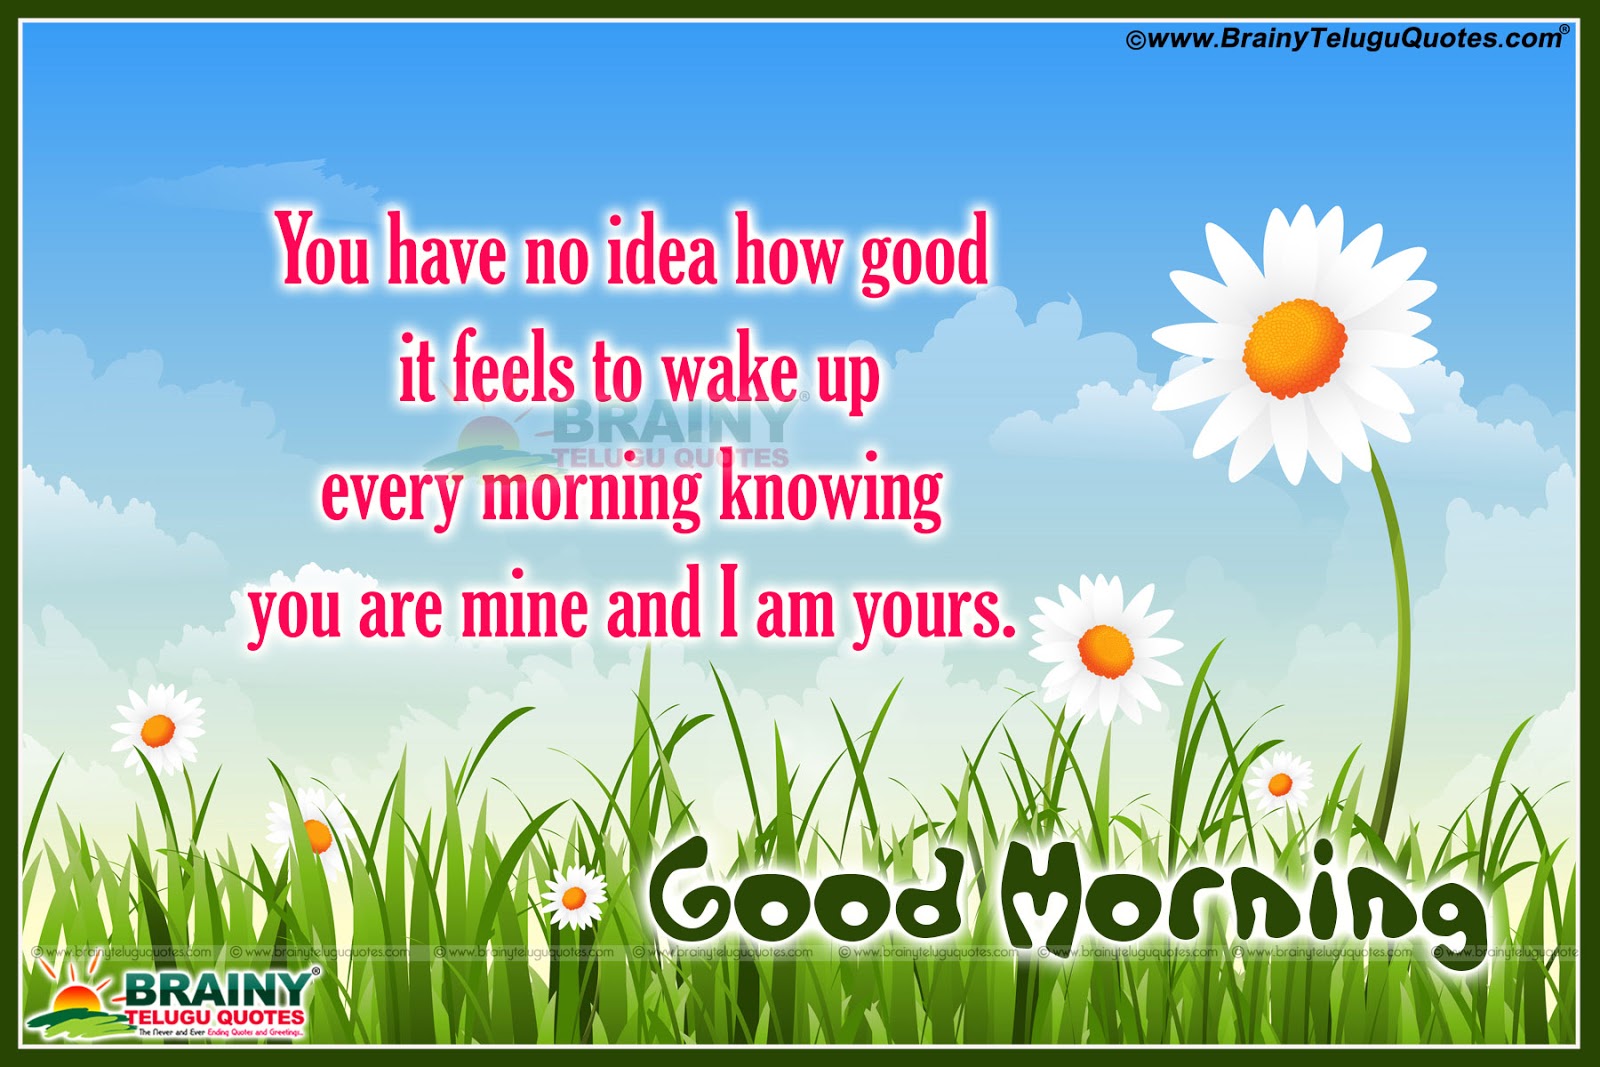 Good Morning E Cards with Inspirational Life Quotes in 